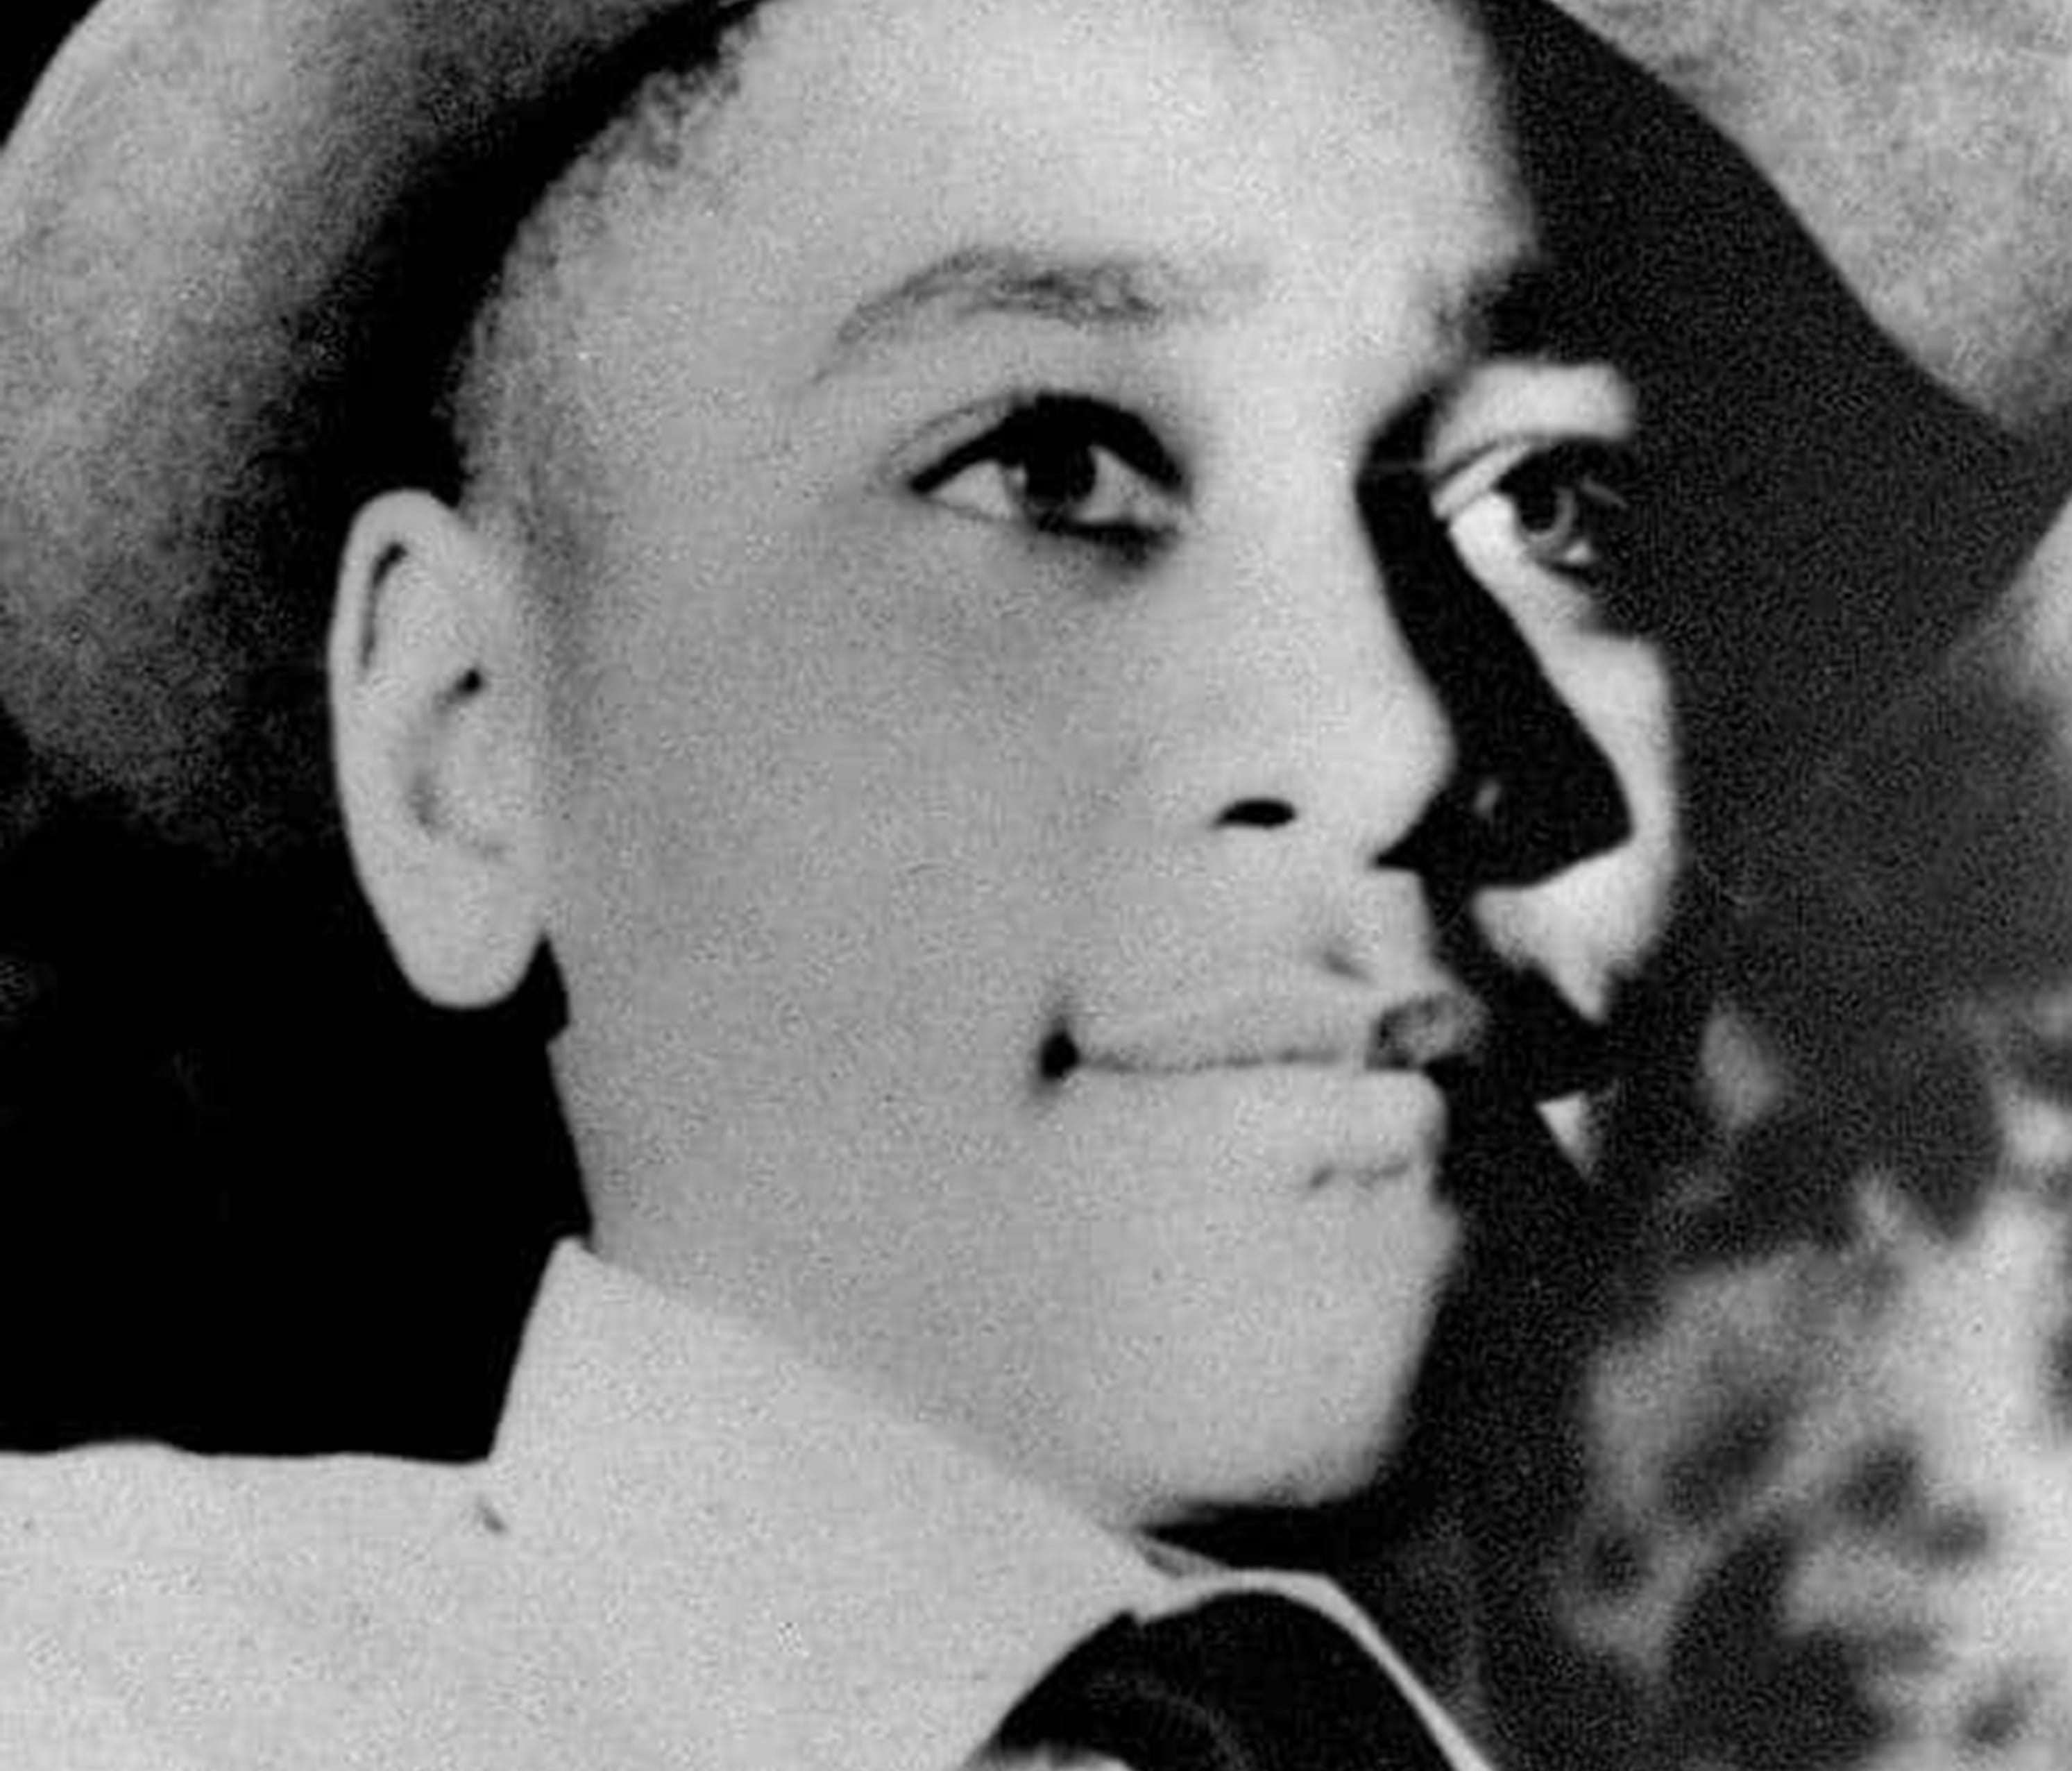 Emmett Till's 1955 killing continues to raise questions. Three books on his death have been published in the past two years.